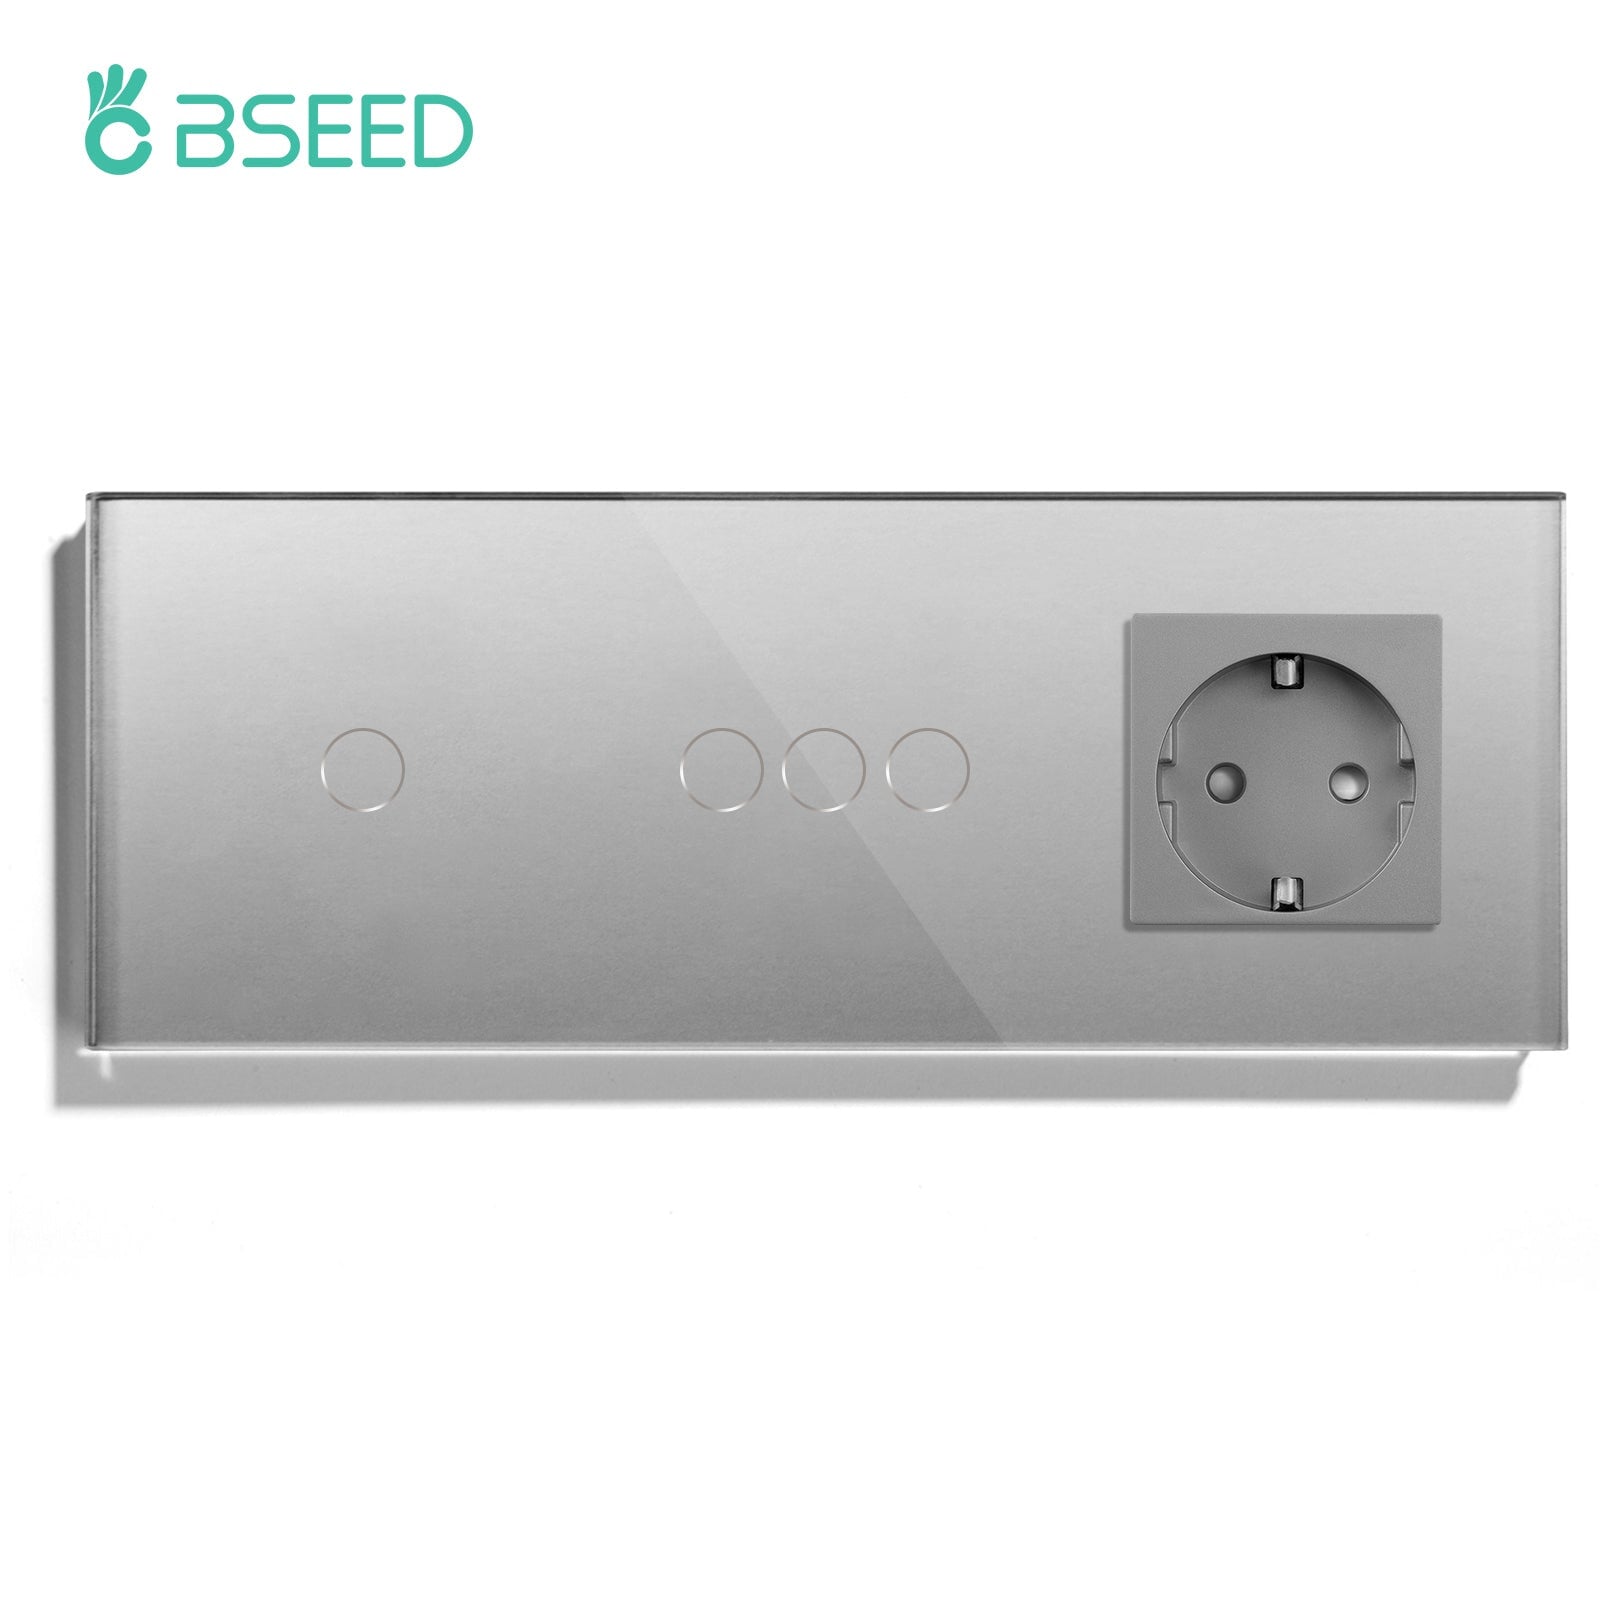 BSEED Double Touch 1/2/3 Gnag 1/2/3 Way Light Switch With EU Socket Power Outlets & Sockets Bseedswitch Grey 1gang+3gang 1Way